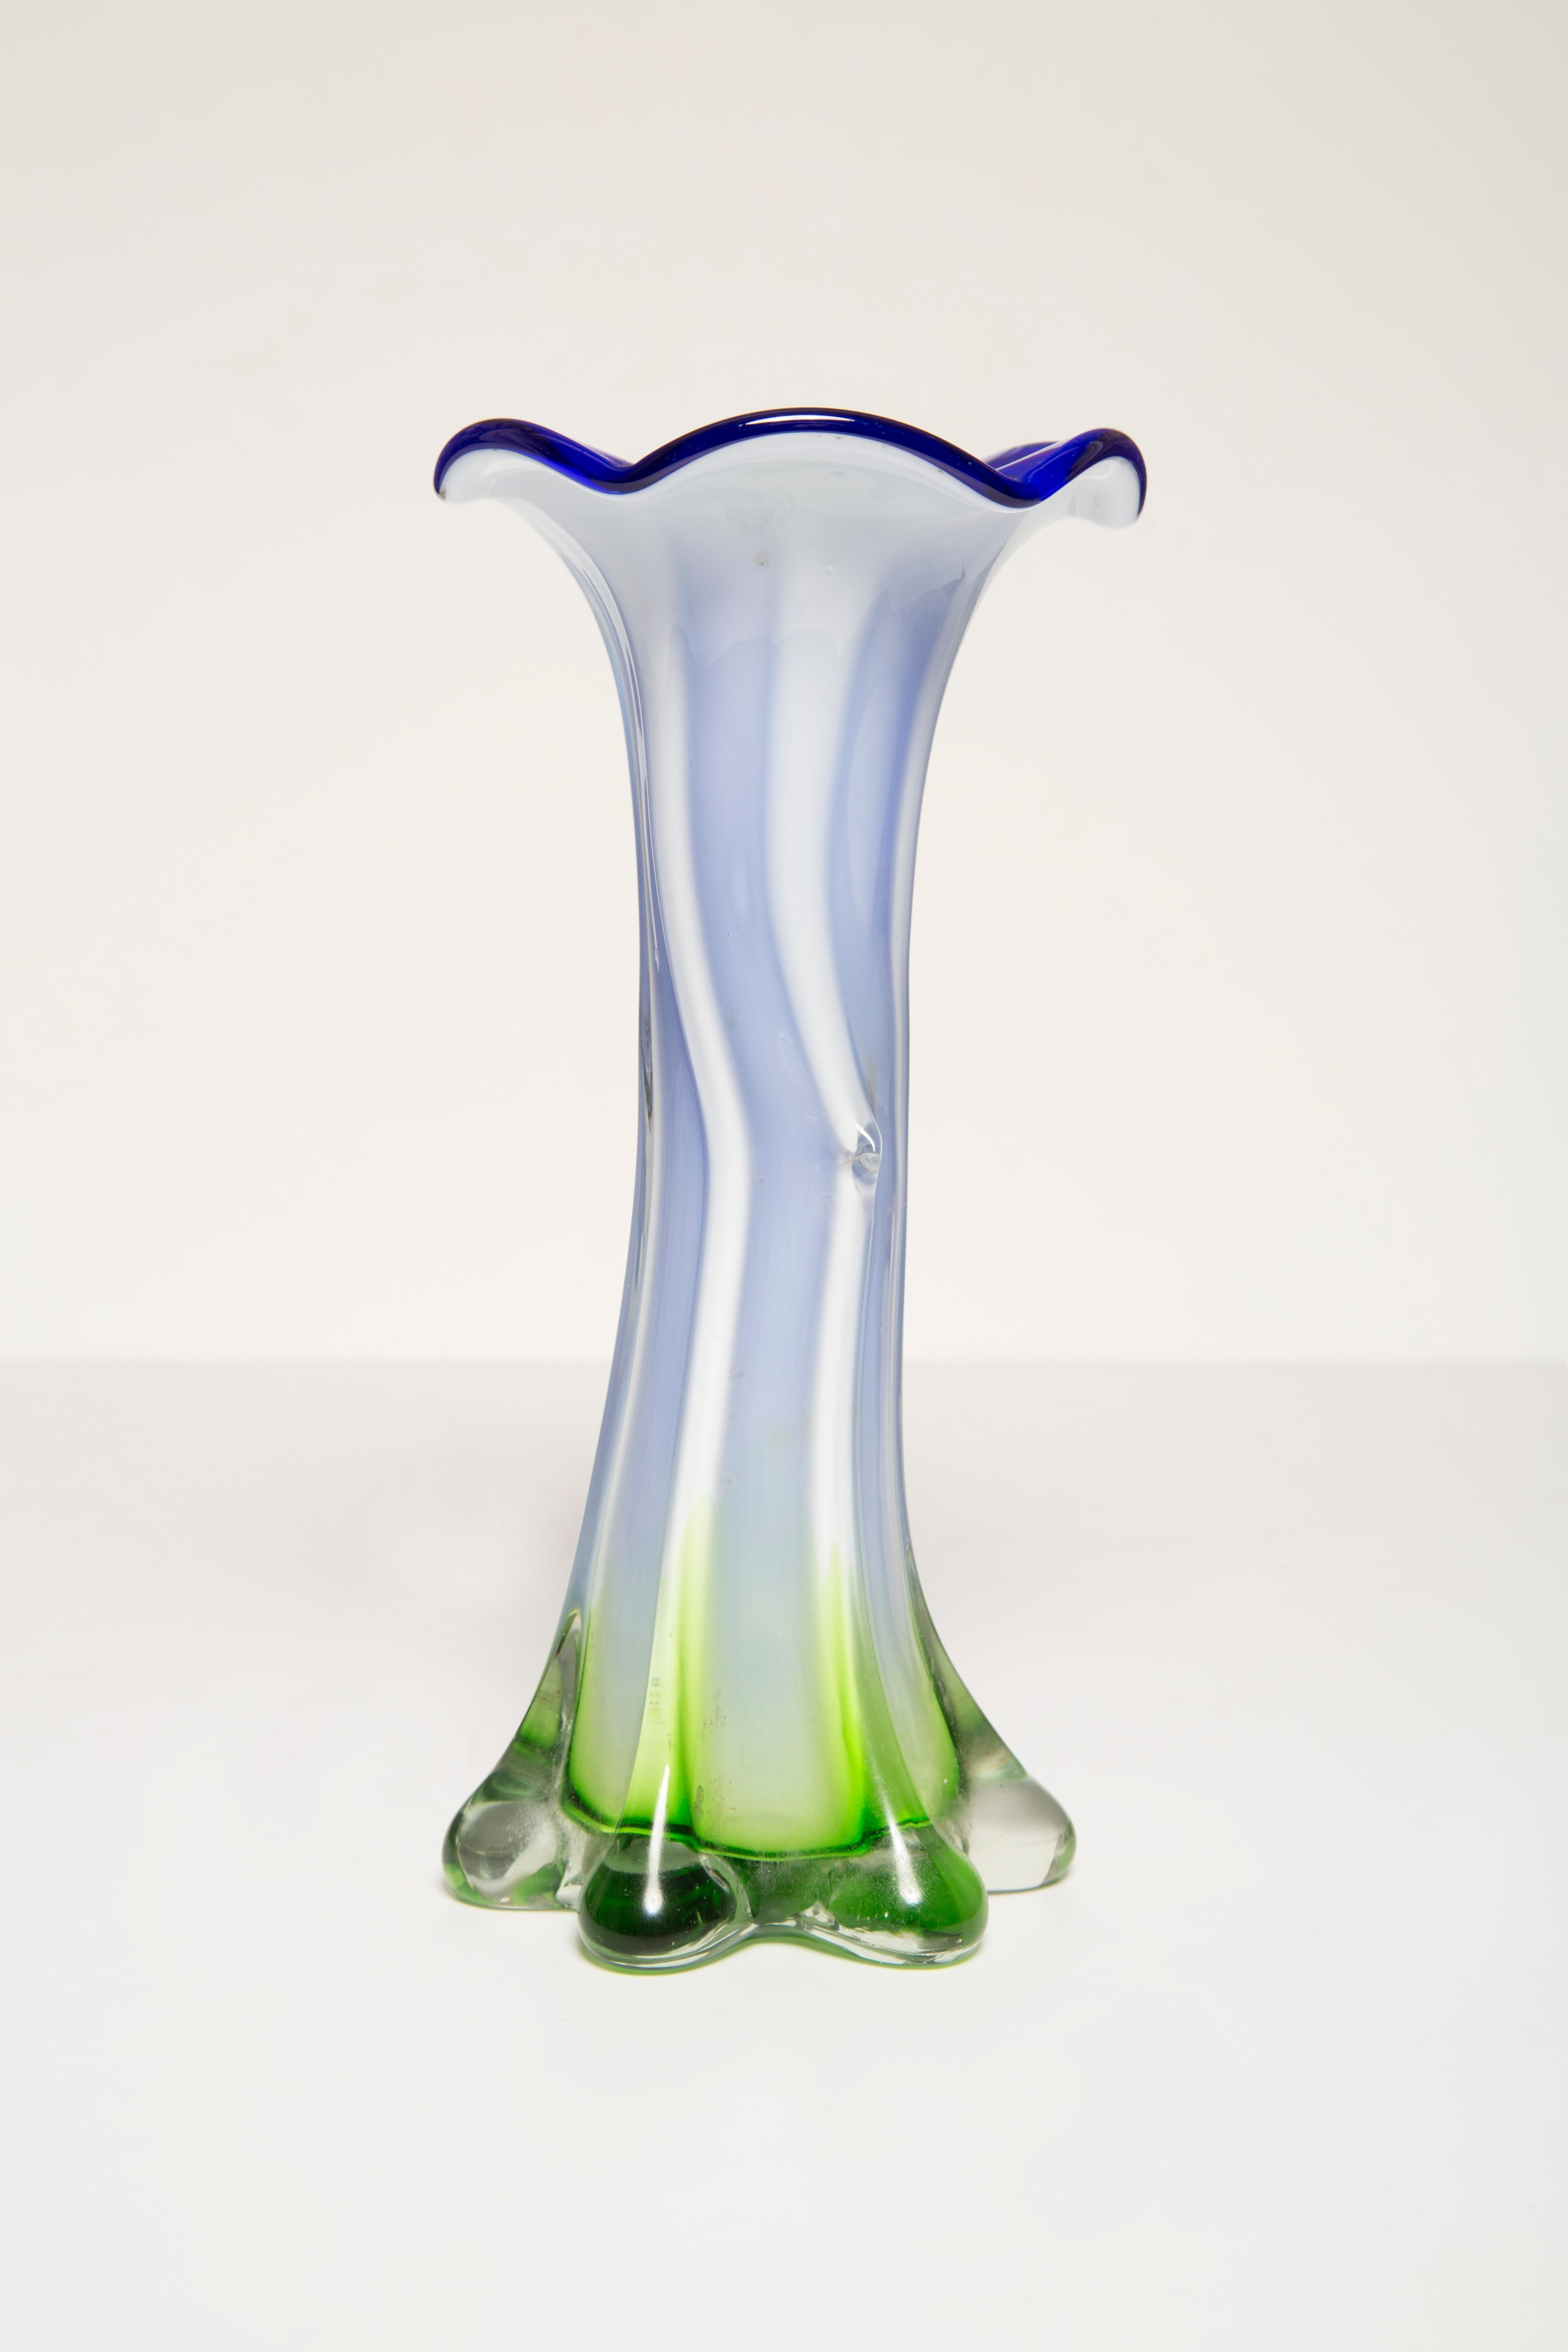 Mid Century Vintage Green and Blue Murano Vase, Italy, 1960s For Sale 6